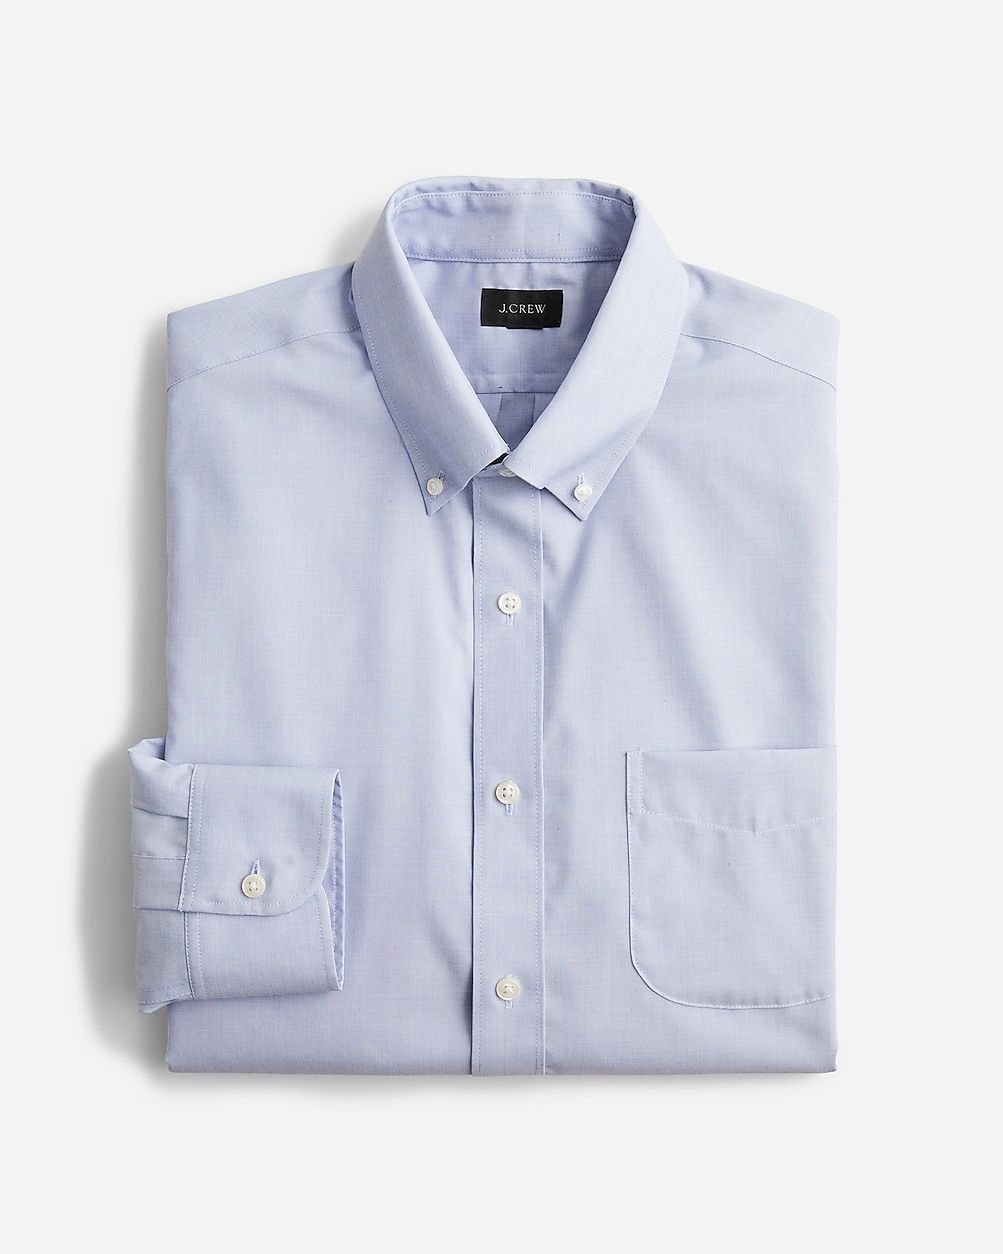 Bowery wrinkle-free dress shirt with button-down collar | J.Crew US